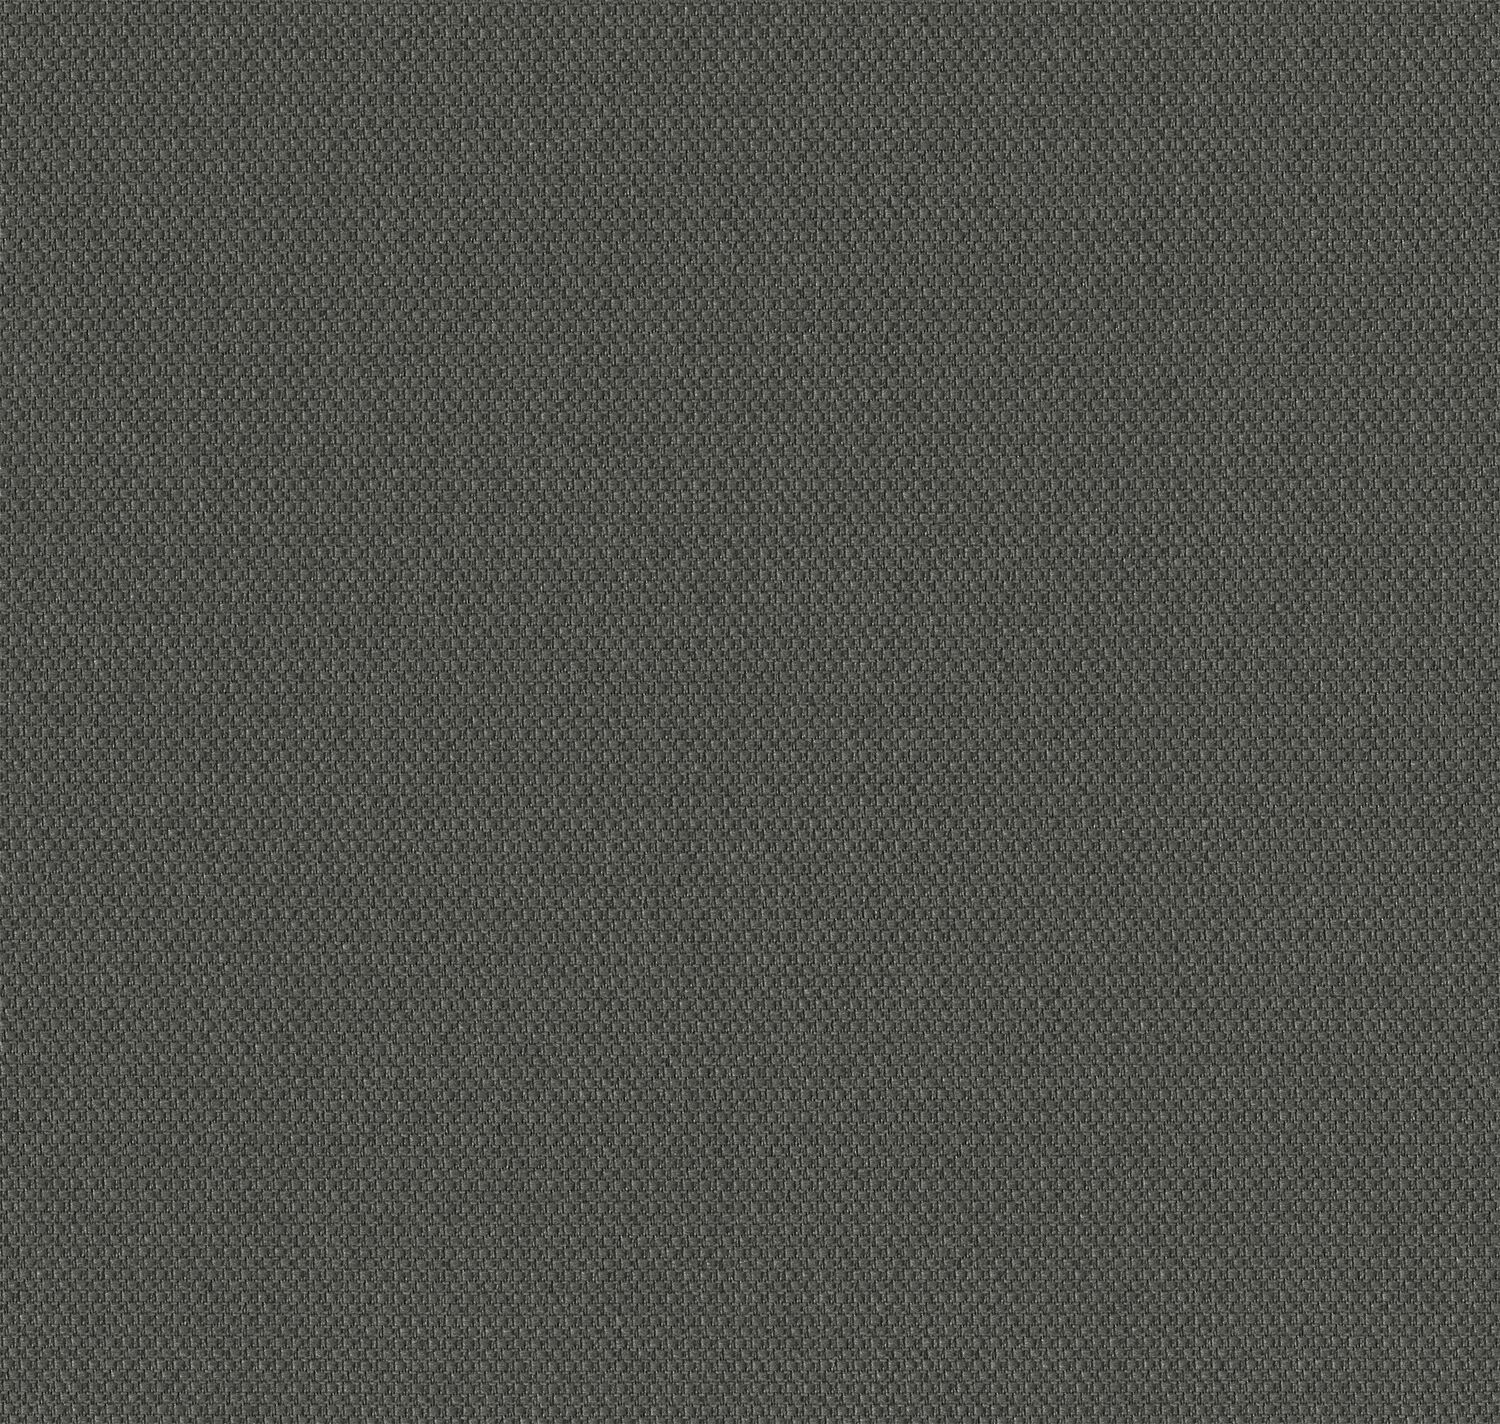 Biotope - Outcrop - 4113 - 02 - Half Yard Tileable Swatches